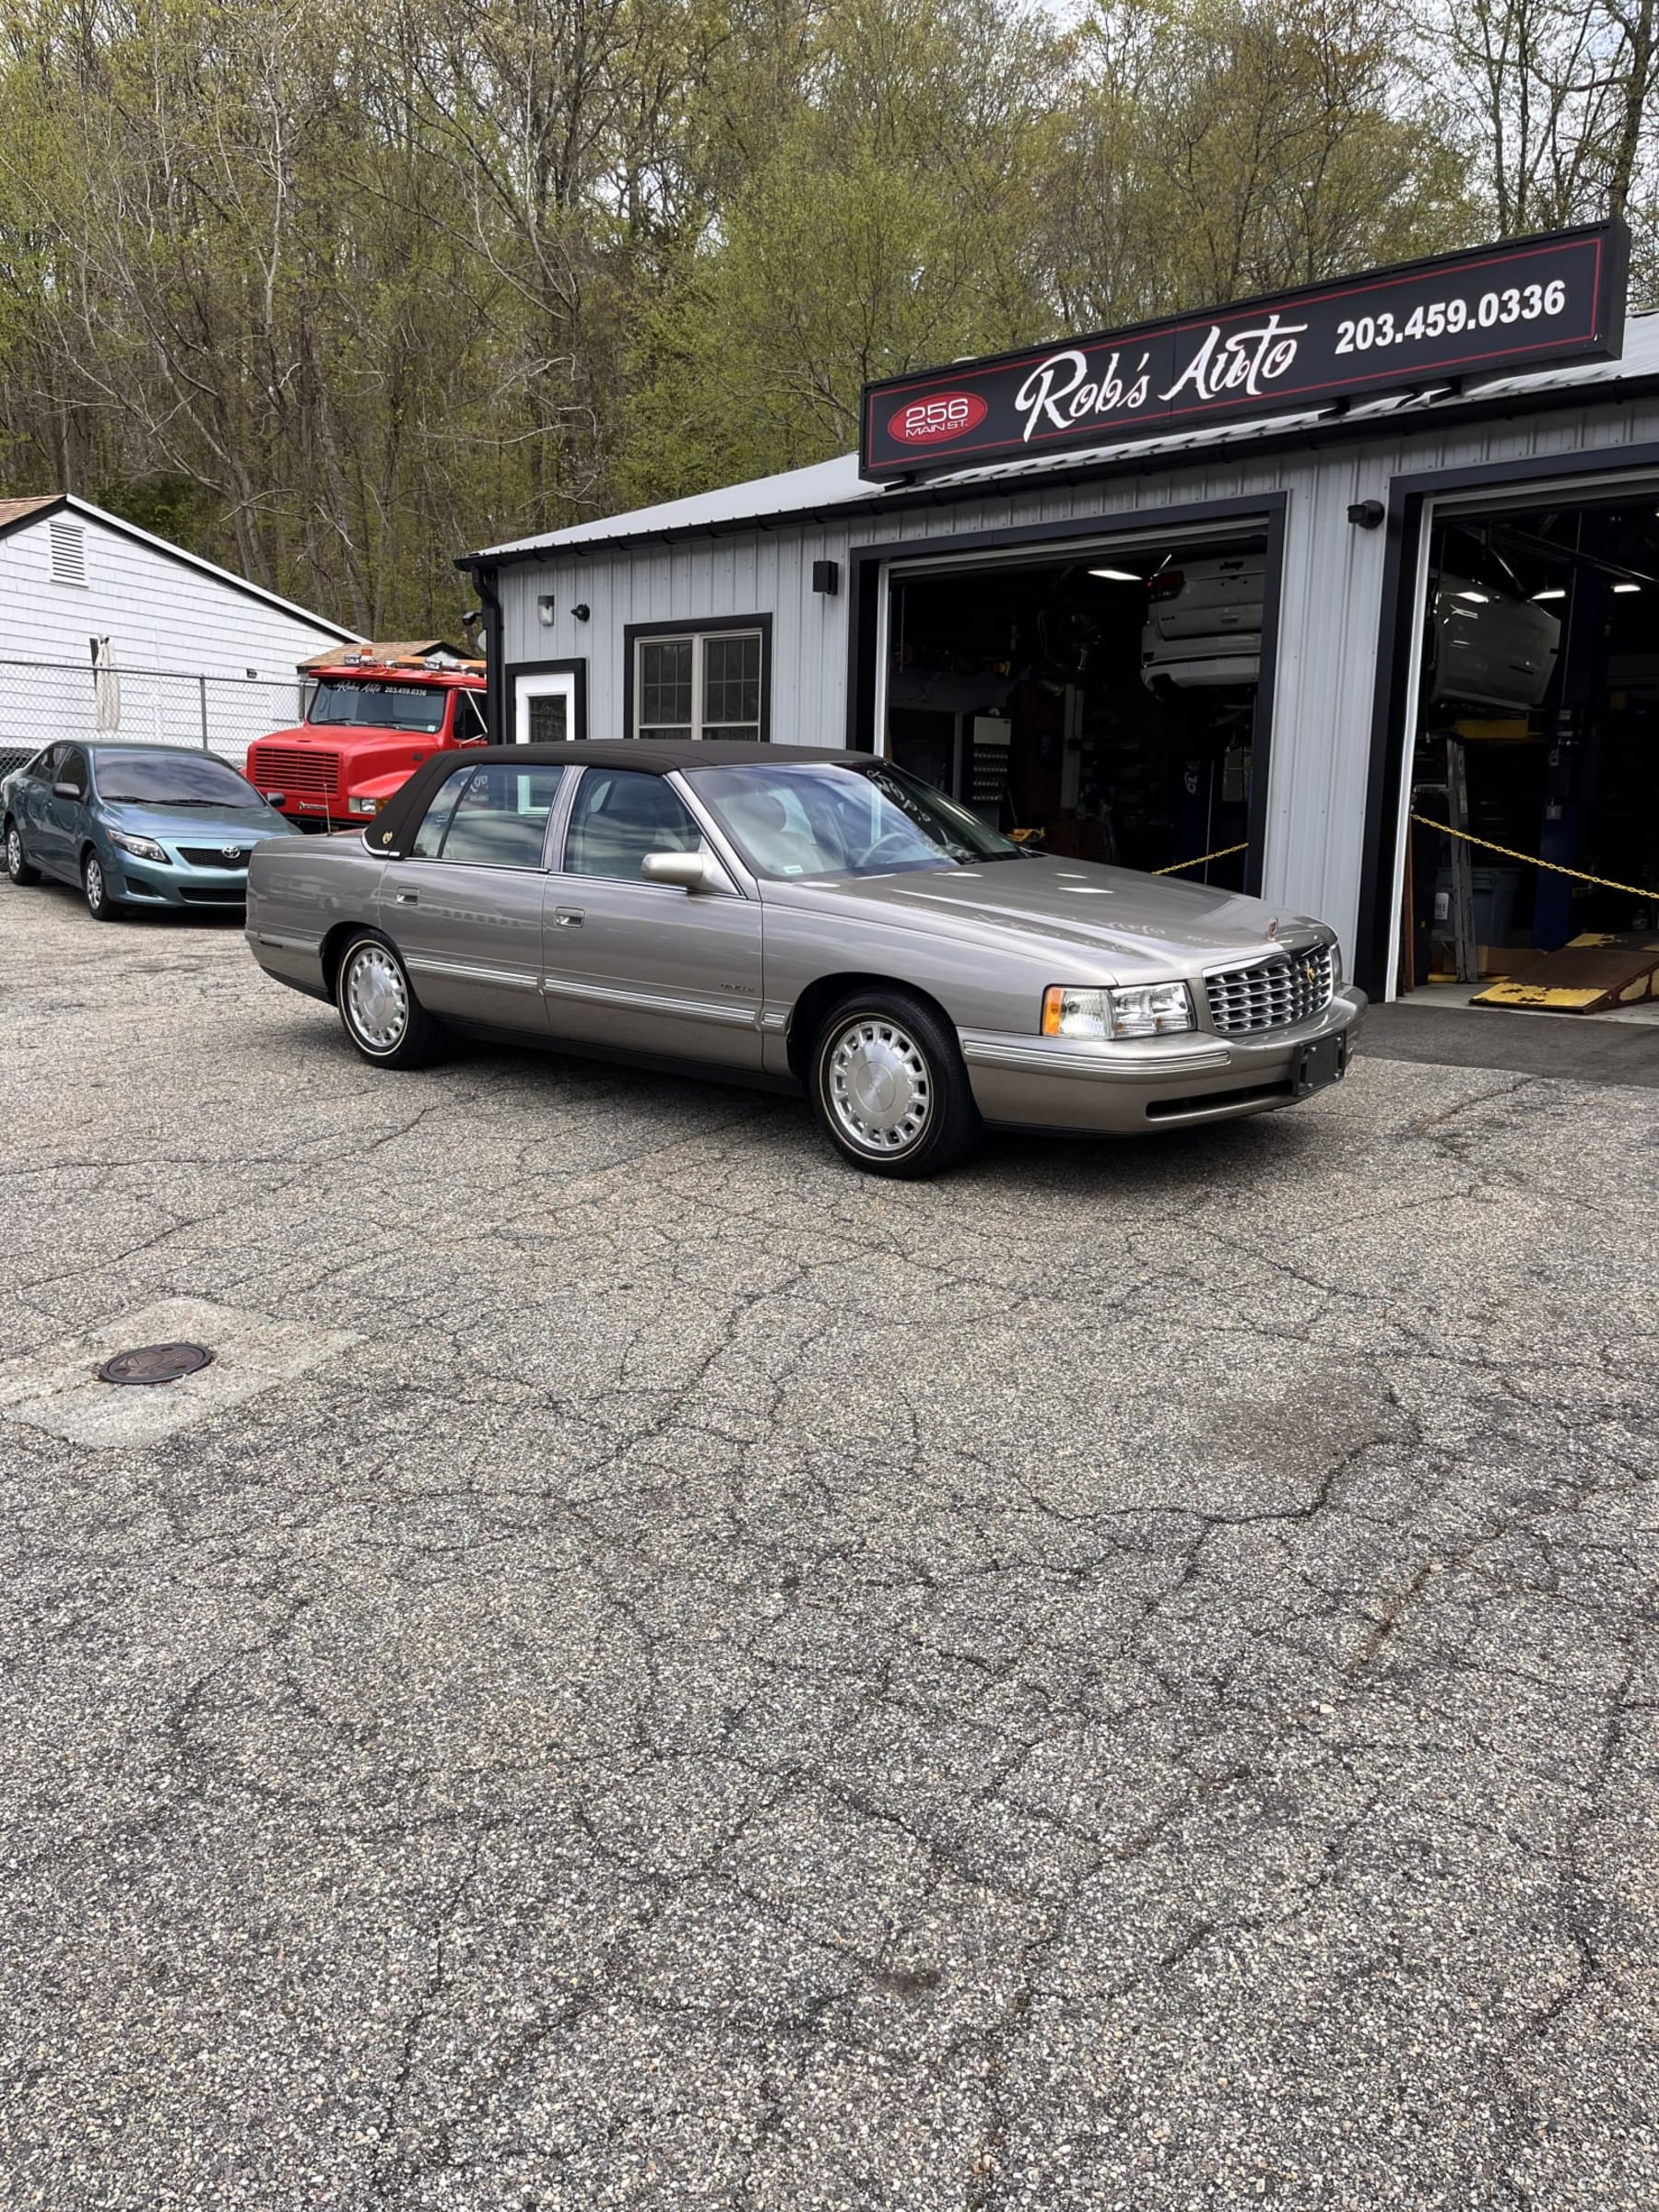 NEW ARRIVAL!! Looking for a diamond in the rough? Just in a 1999 Cadillac DeVille! 50 year golden anniversary edition!! ONLY 29,500 miles! Garaged its entire life! Runs and drives great!! Won’t last at $9,900!!